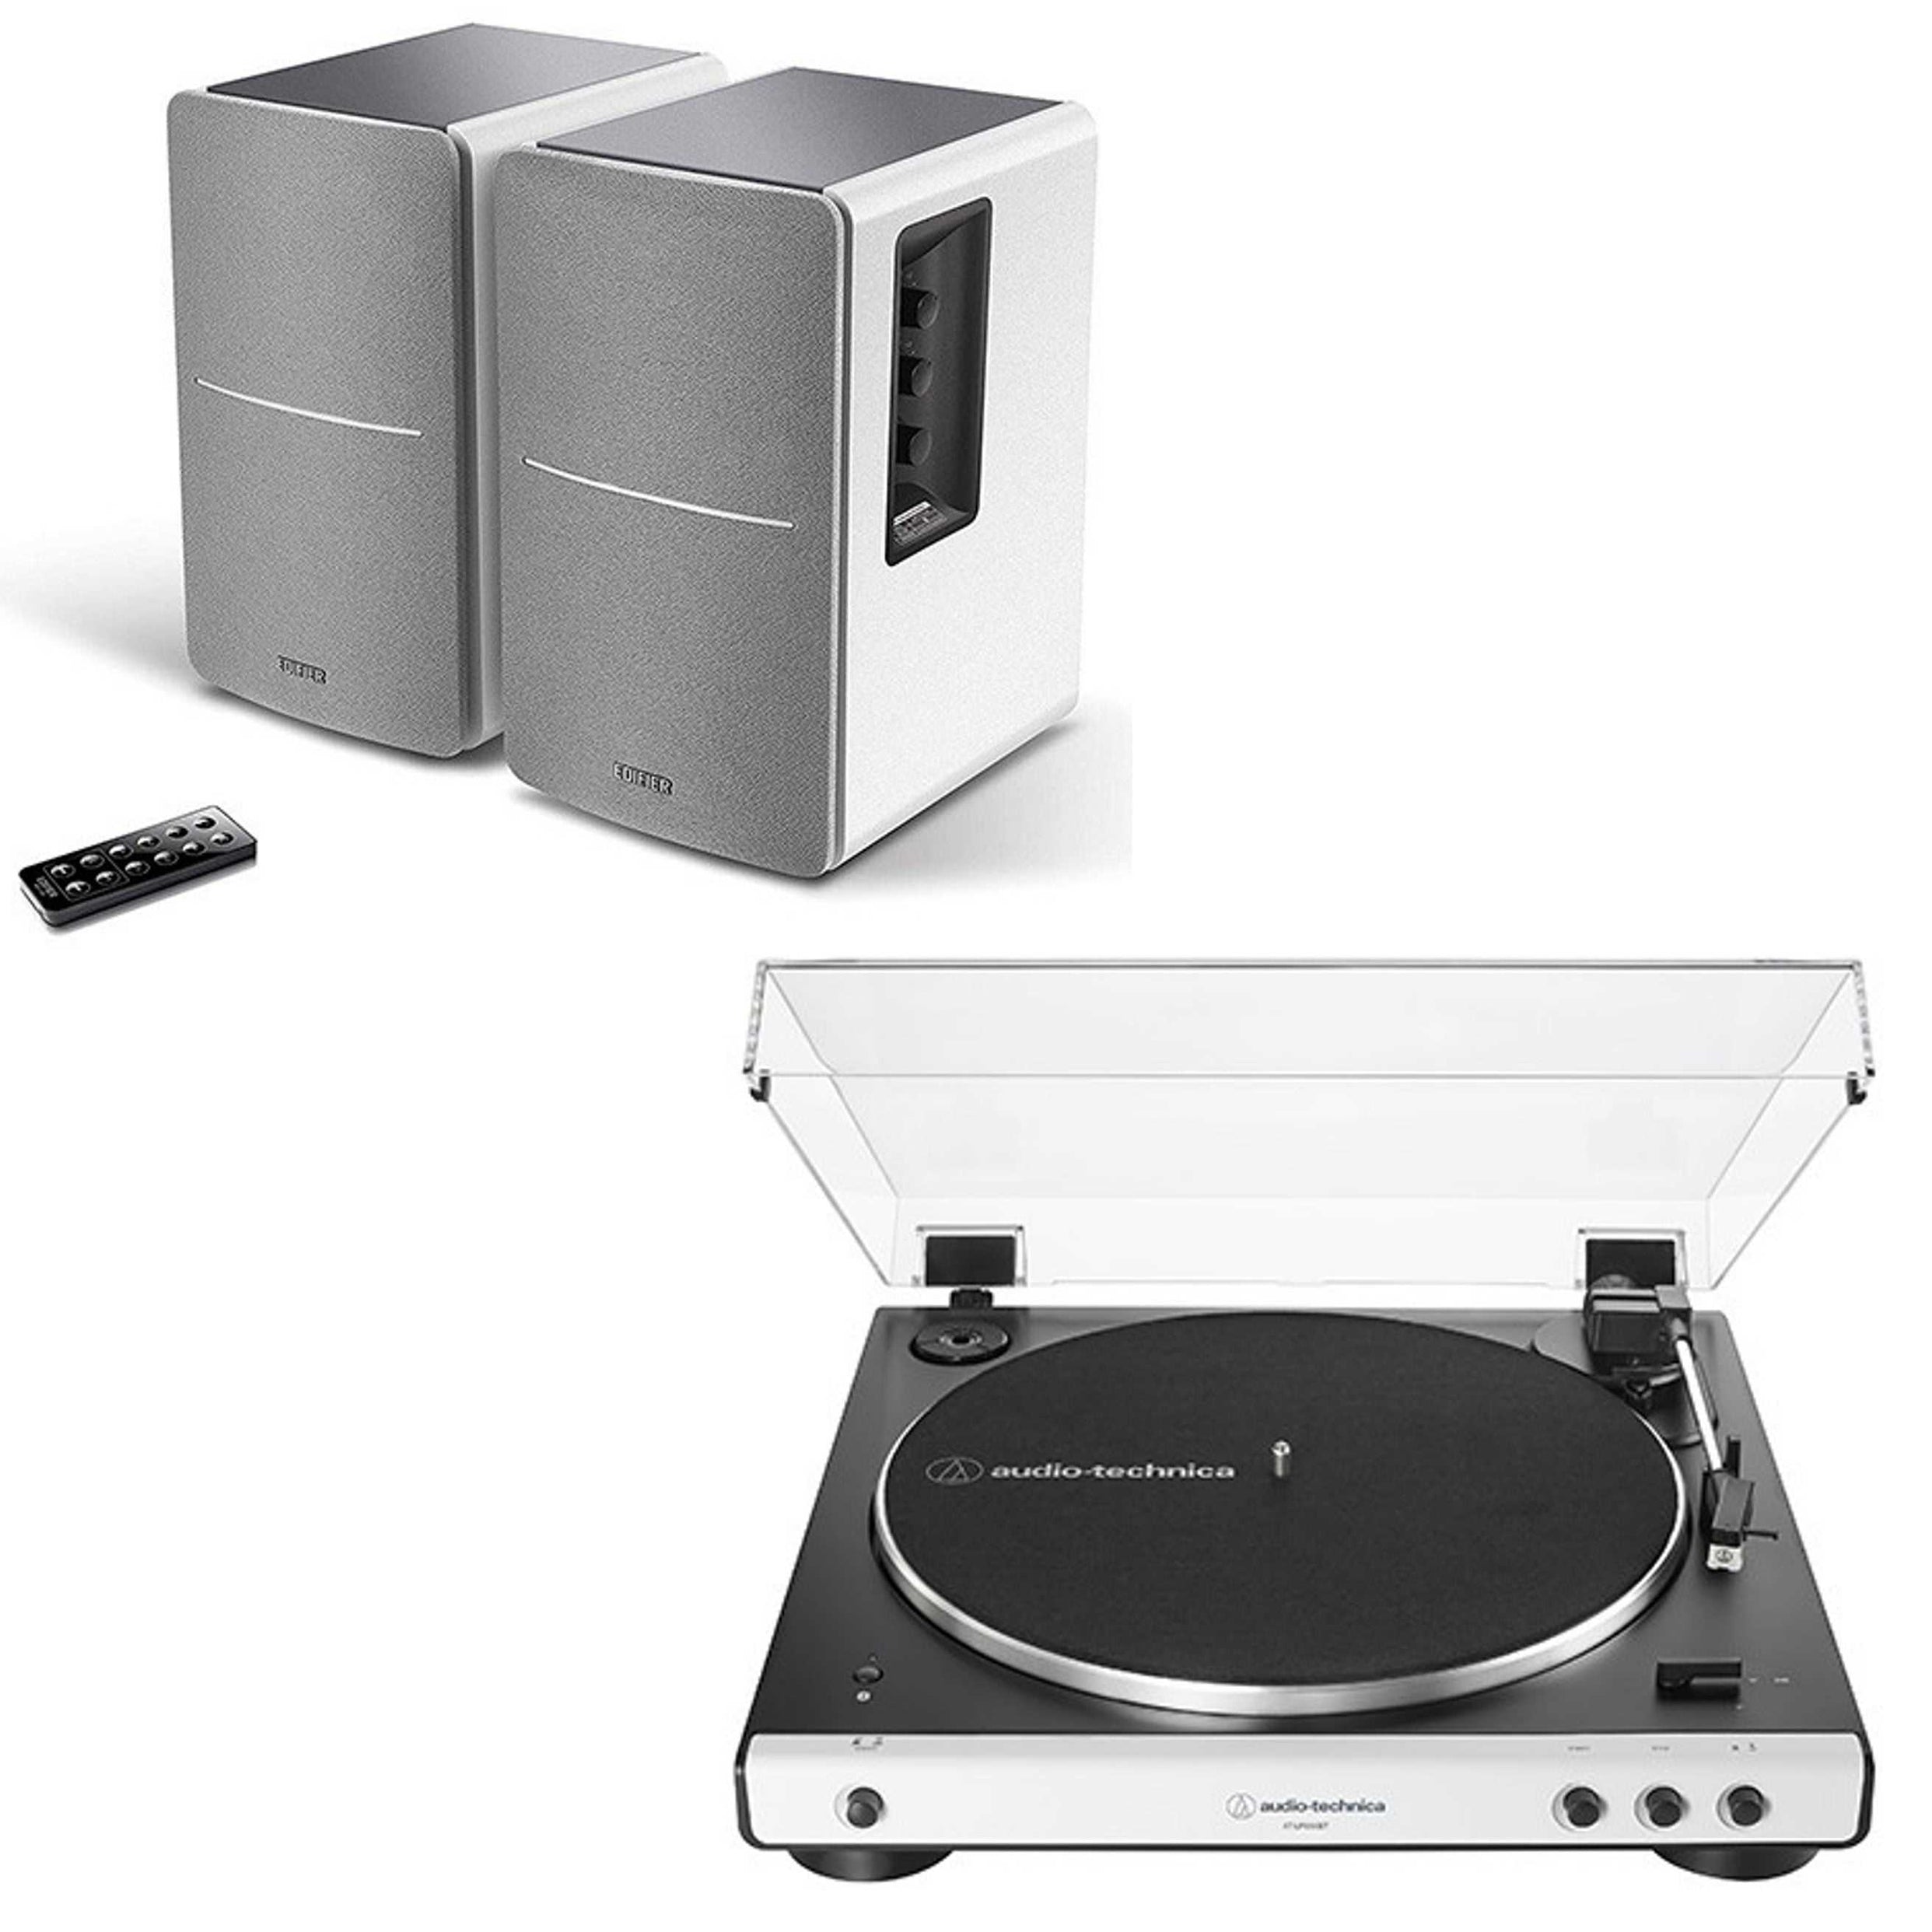 Audio-Technica AT-LP60XBT Turntable Black/White and Edifier R1280DB White Active Speaker Bundle